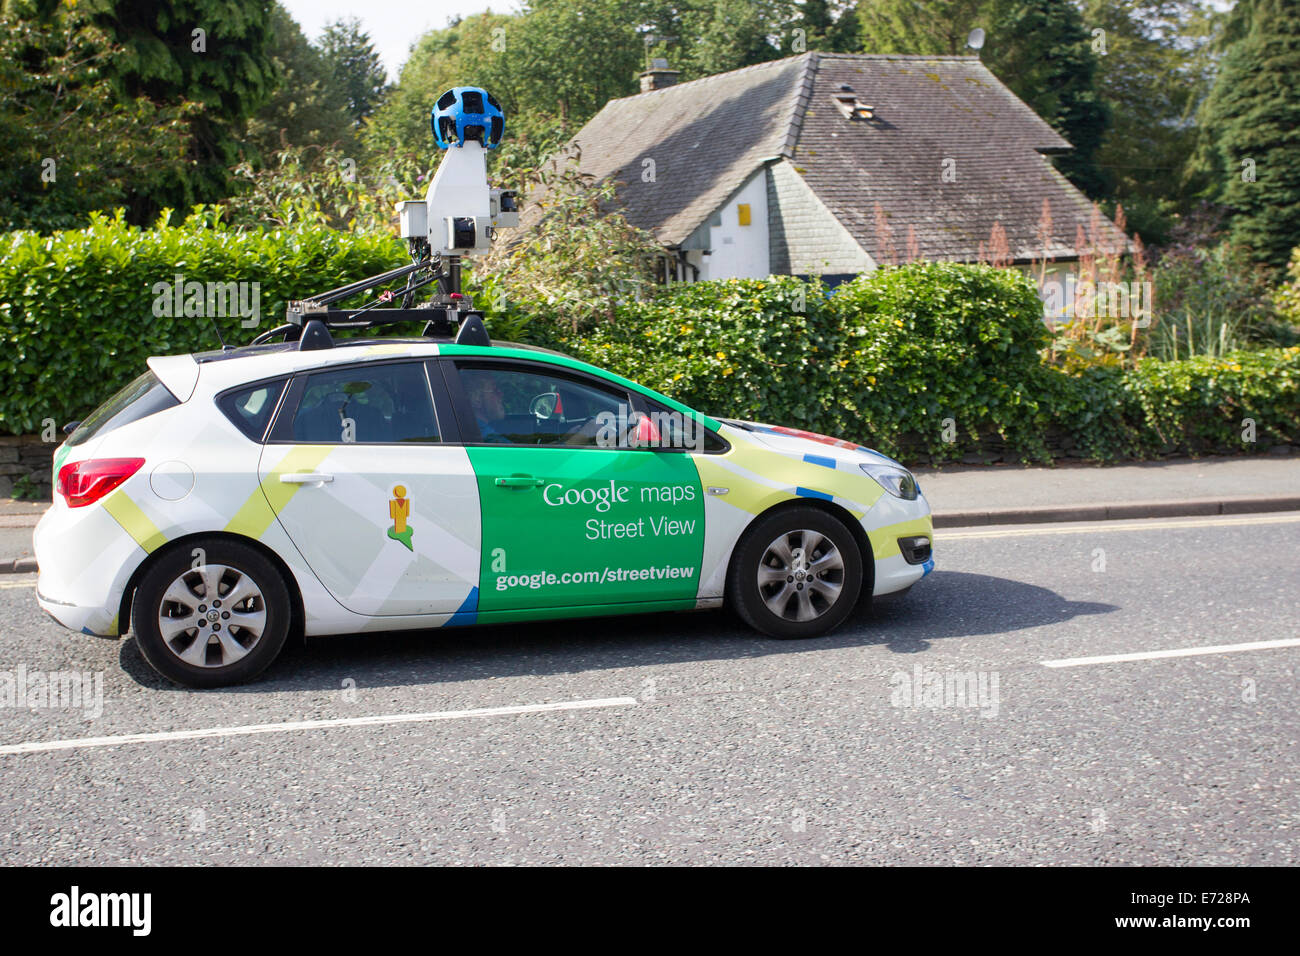 Google Maps Street View camera car in and around Windermere Stock Photo